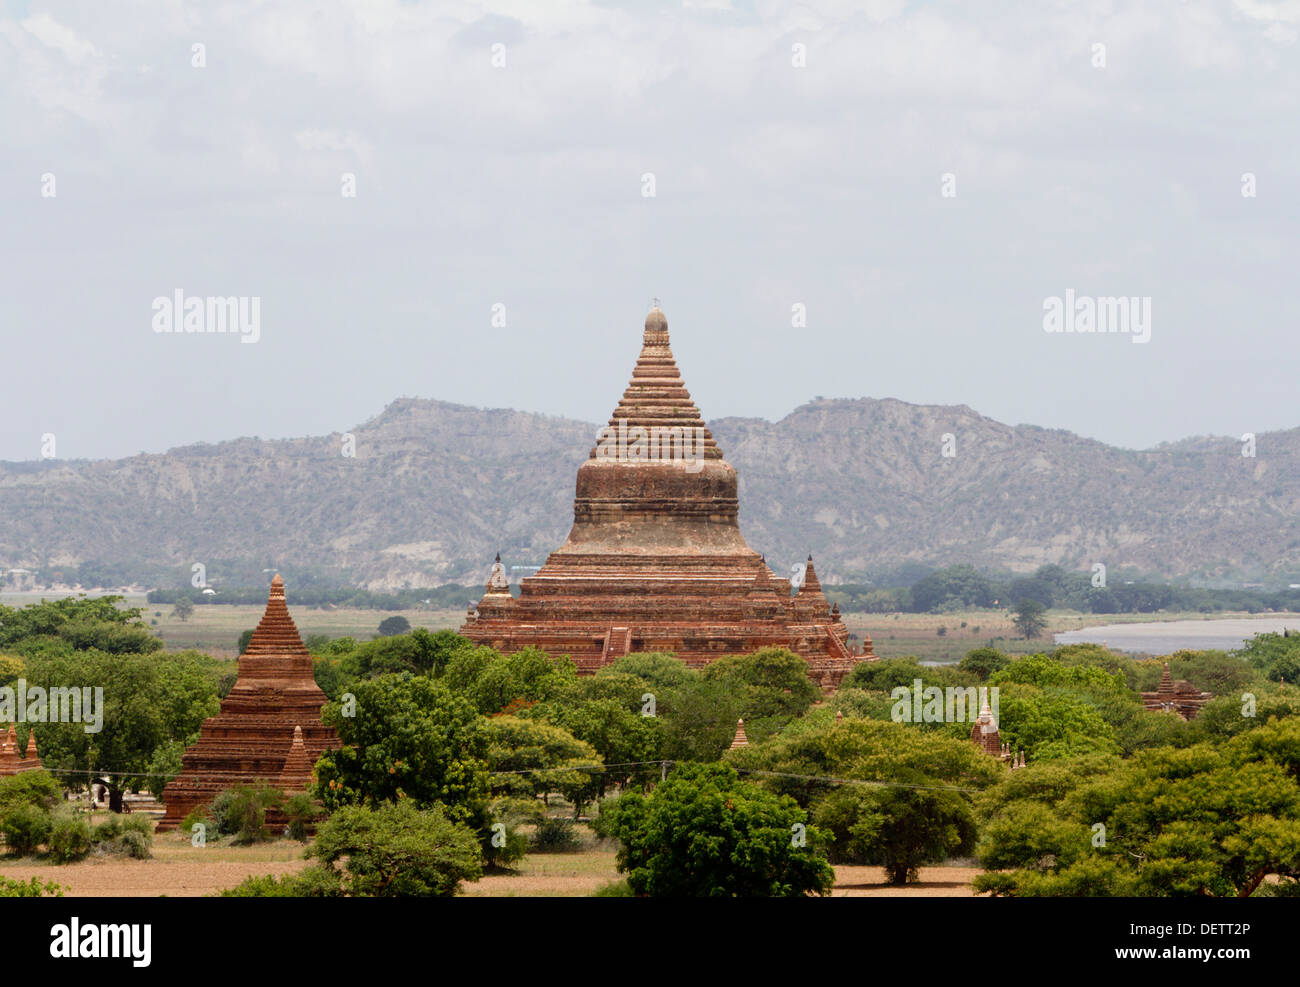 A view of Temples in the central plain of Bagan. Stock Photo